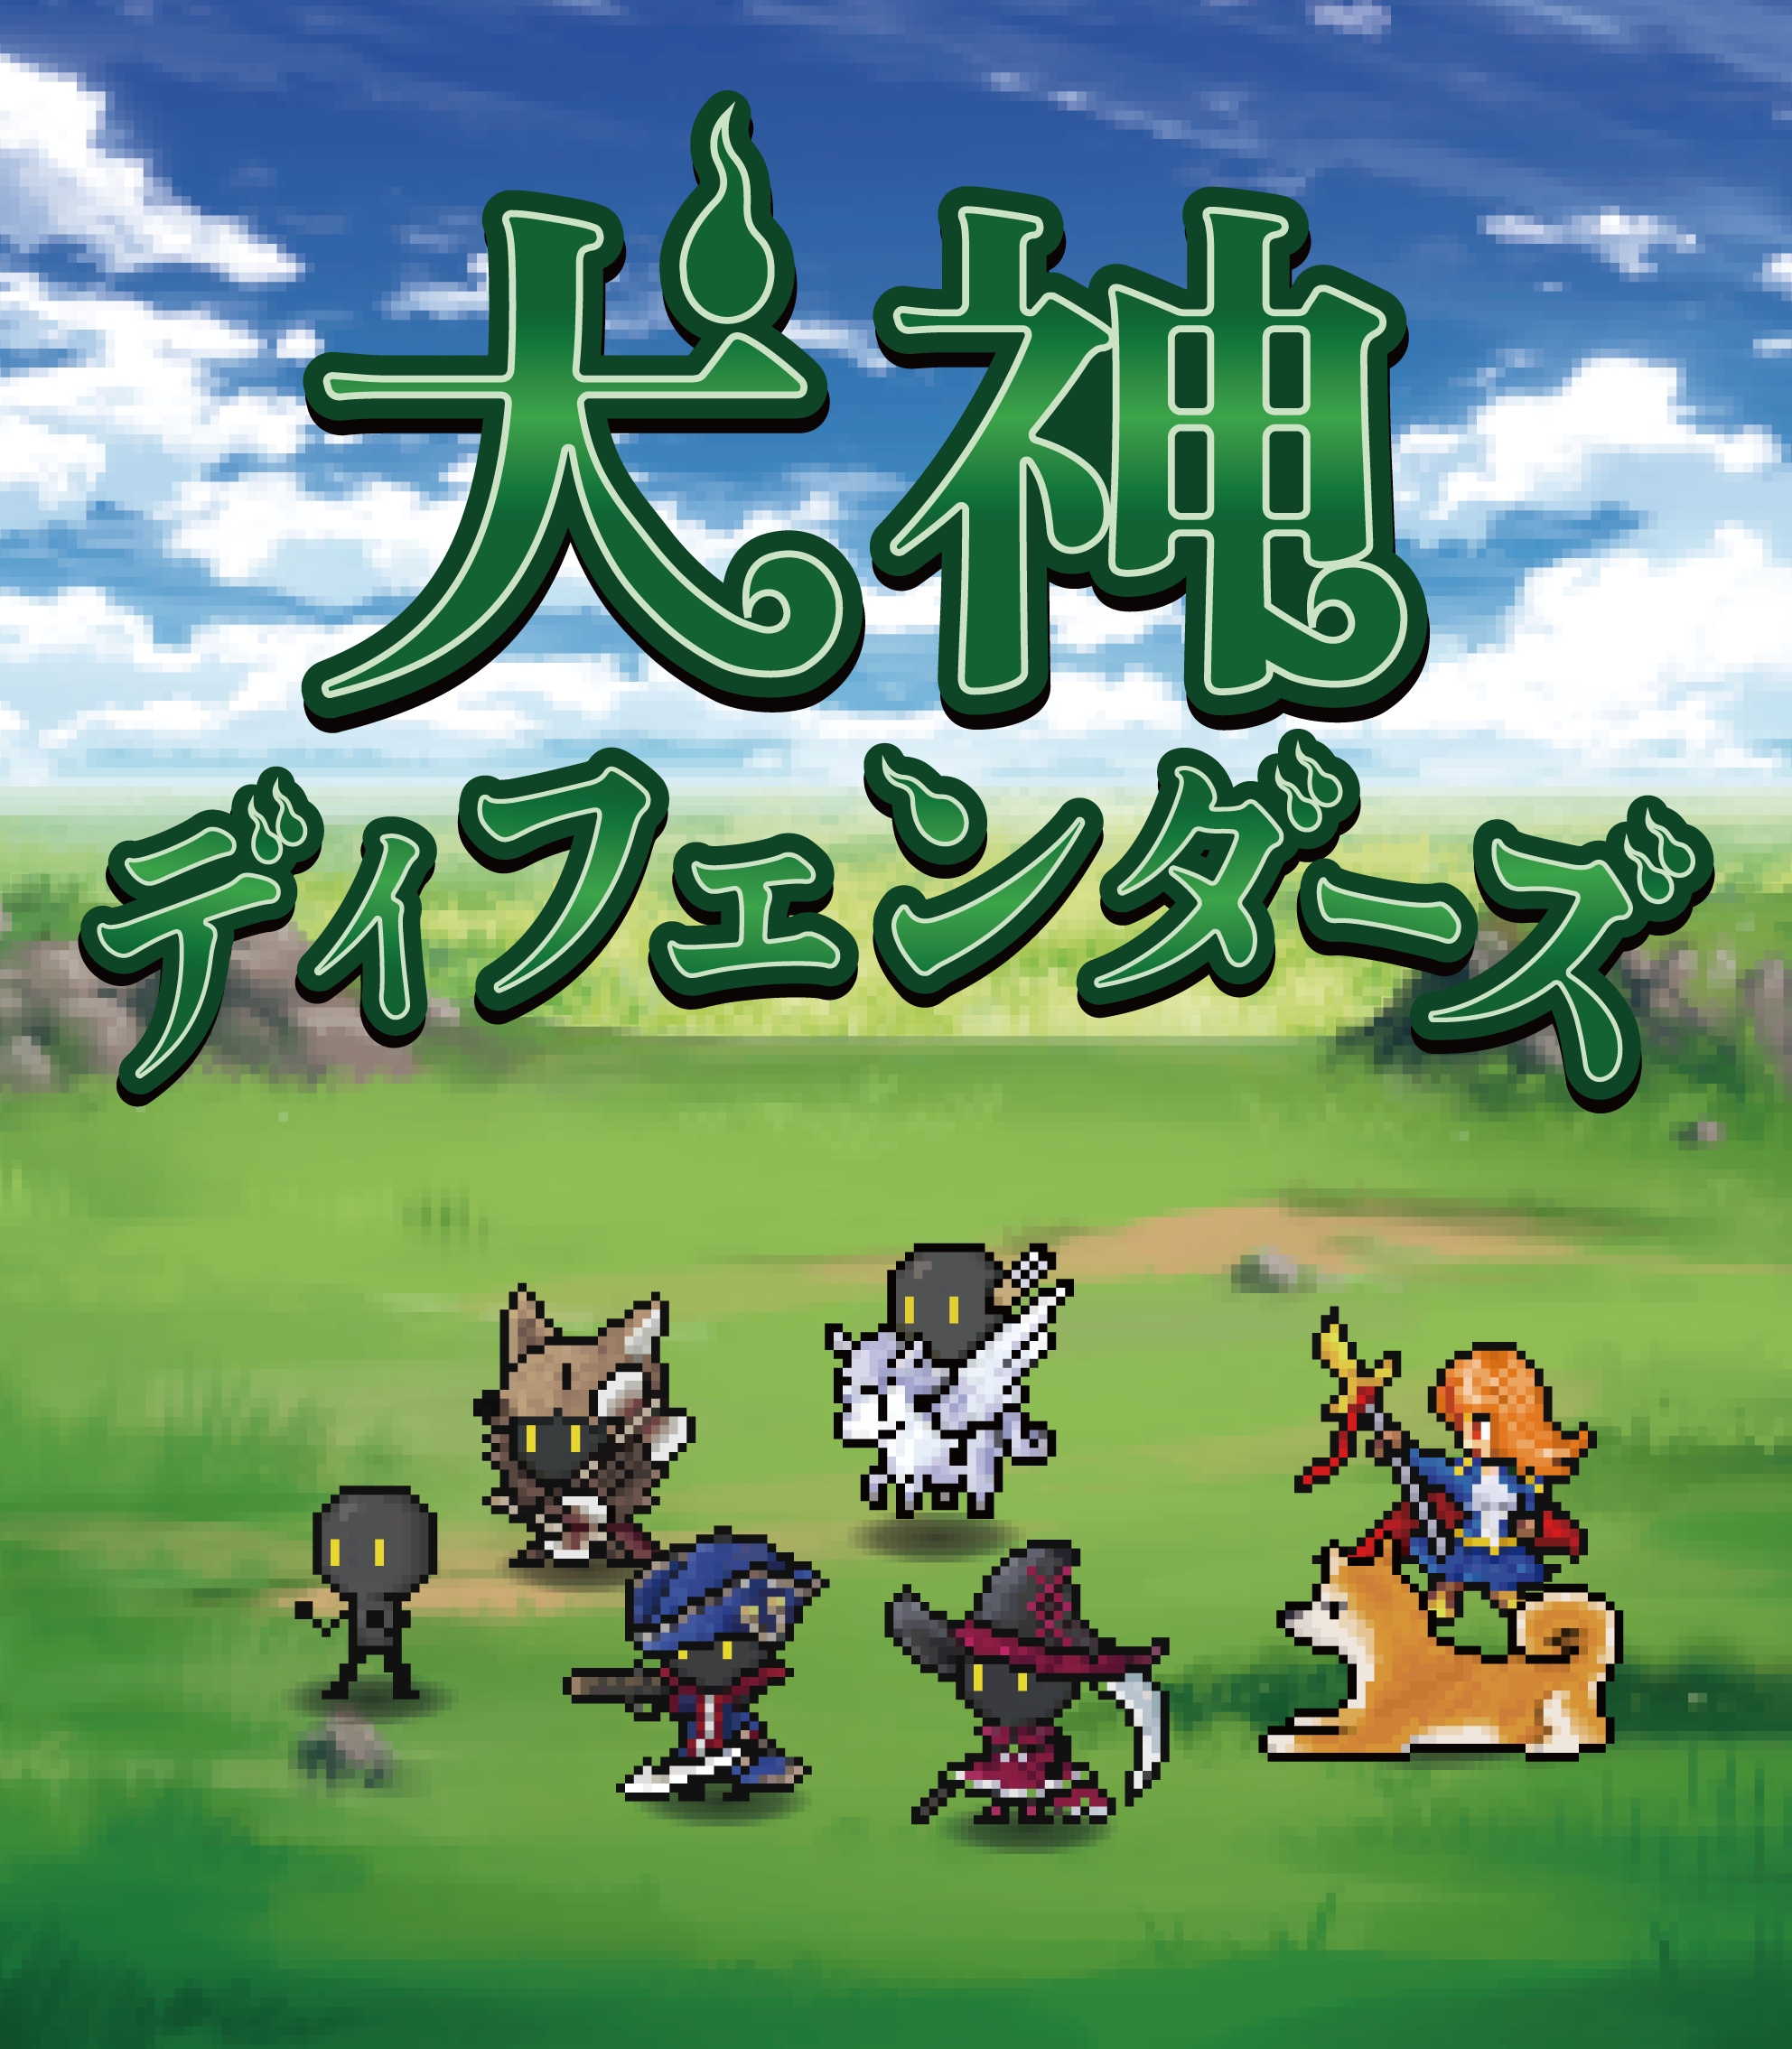 A beta version of the personal tower defense game ‘Inugami Defenders’ will be distributed on Steam on January 31